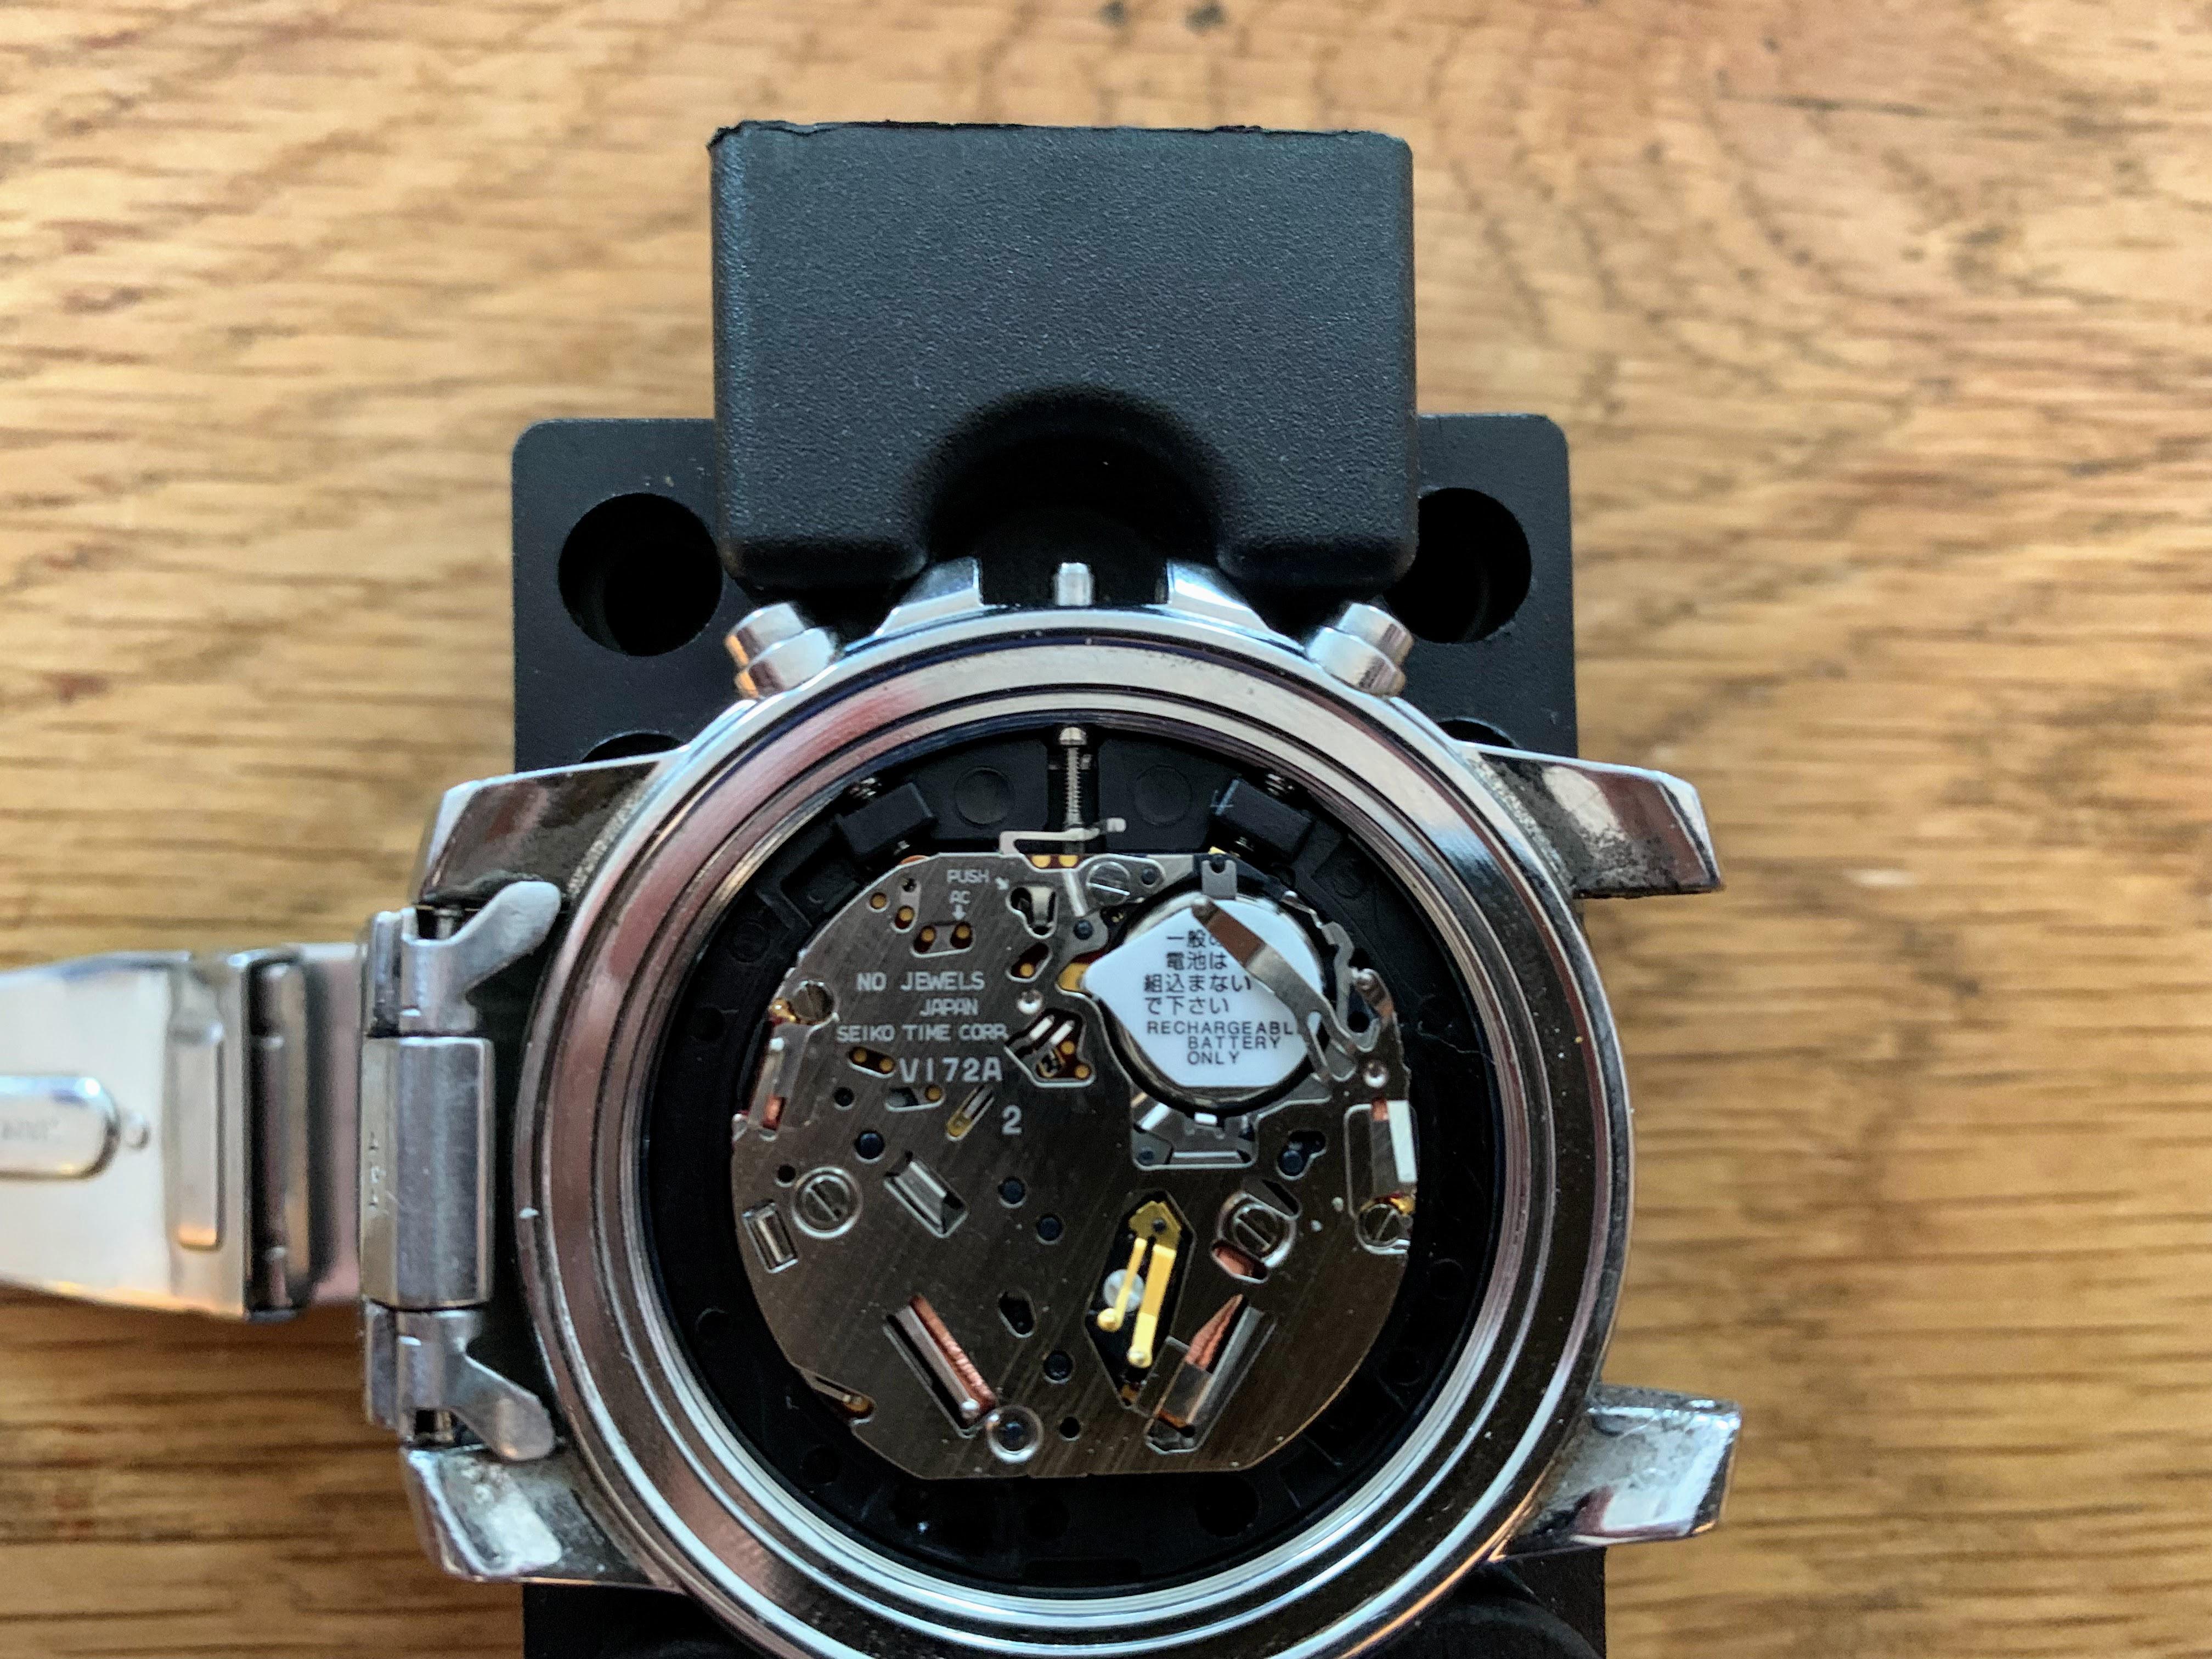 V172 Seiko Solar Watch Stem broke off - How to remove and replace? - Watch  Repairs Help & Advice - Watch Repair Talk